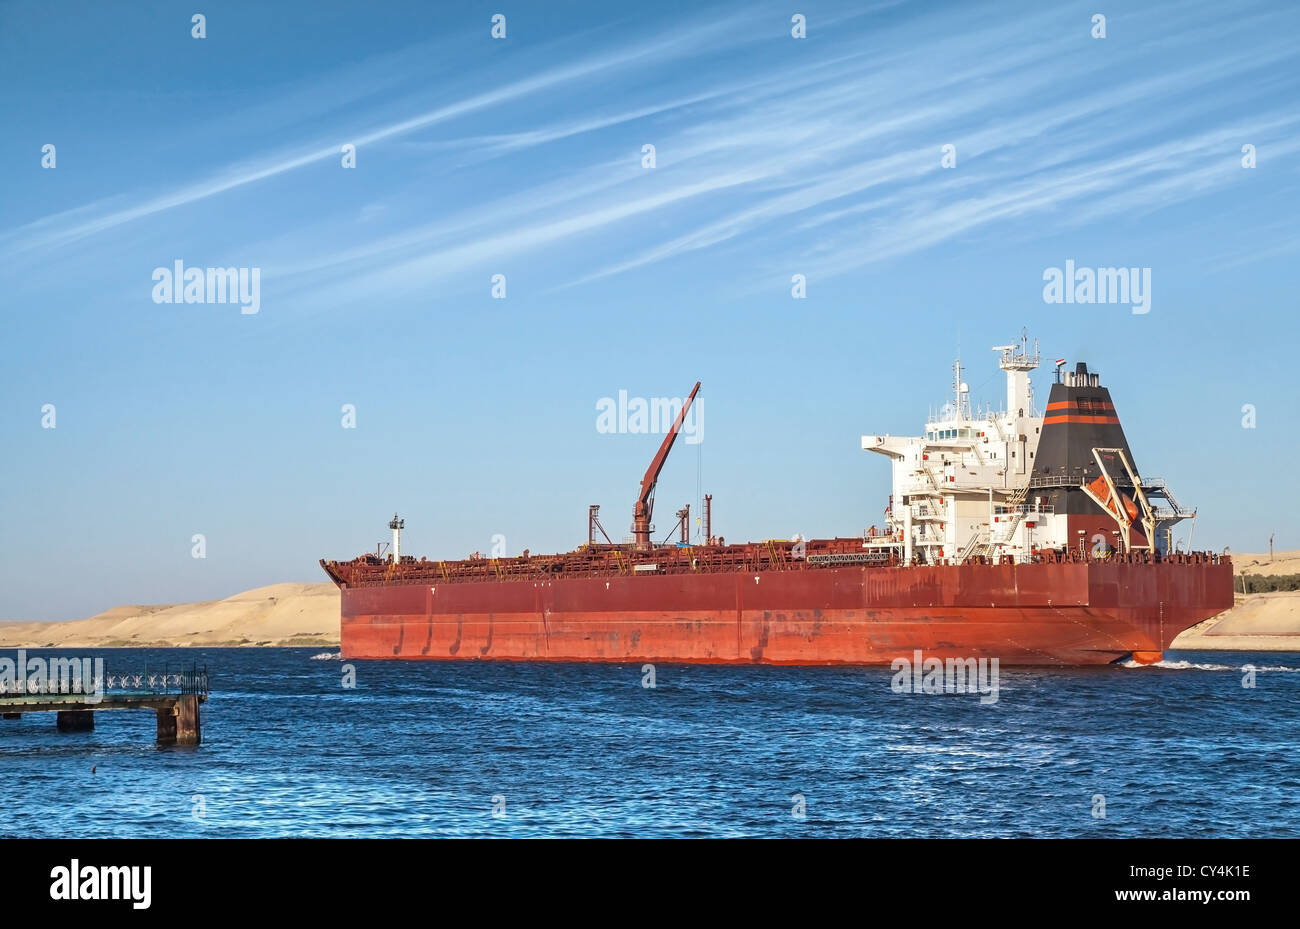 Big red oil tanker passes through the Suez Canal Stock Photo